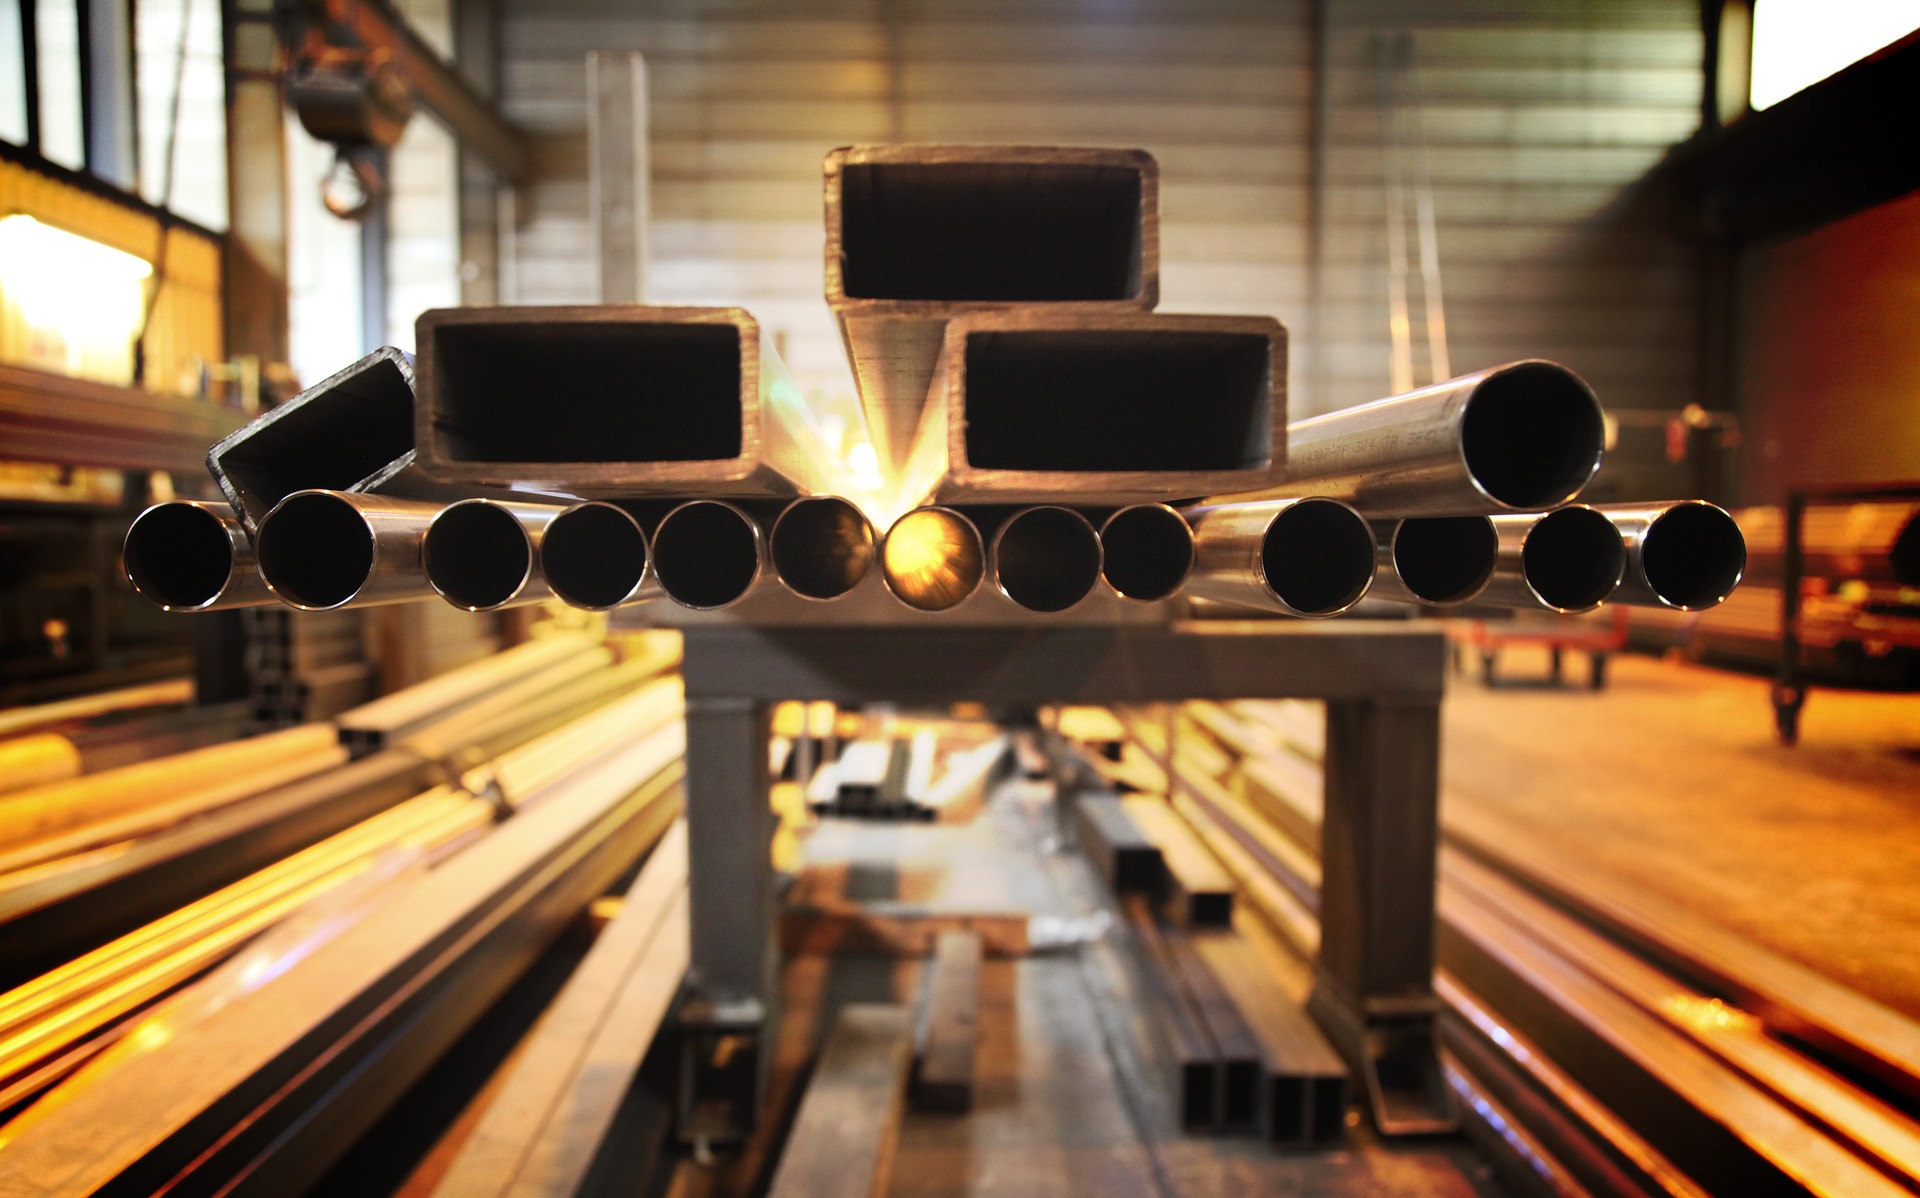 New manufacturing processes can make steel construction a greener option and add U.S. jobs